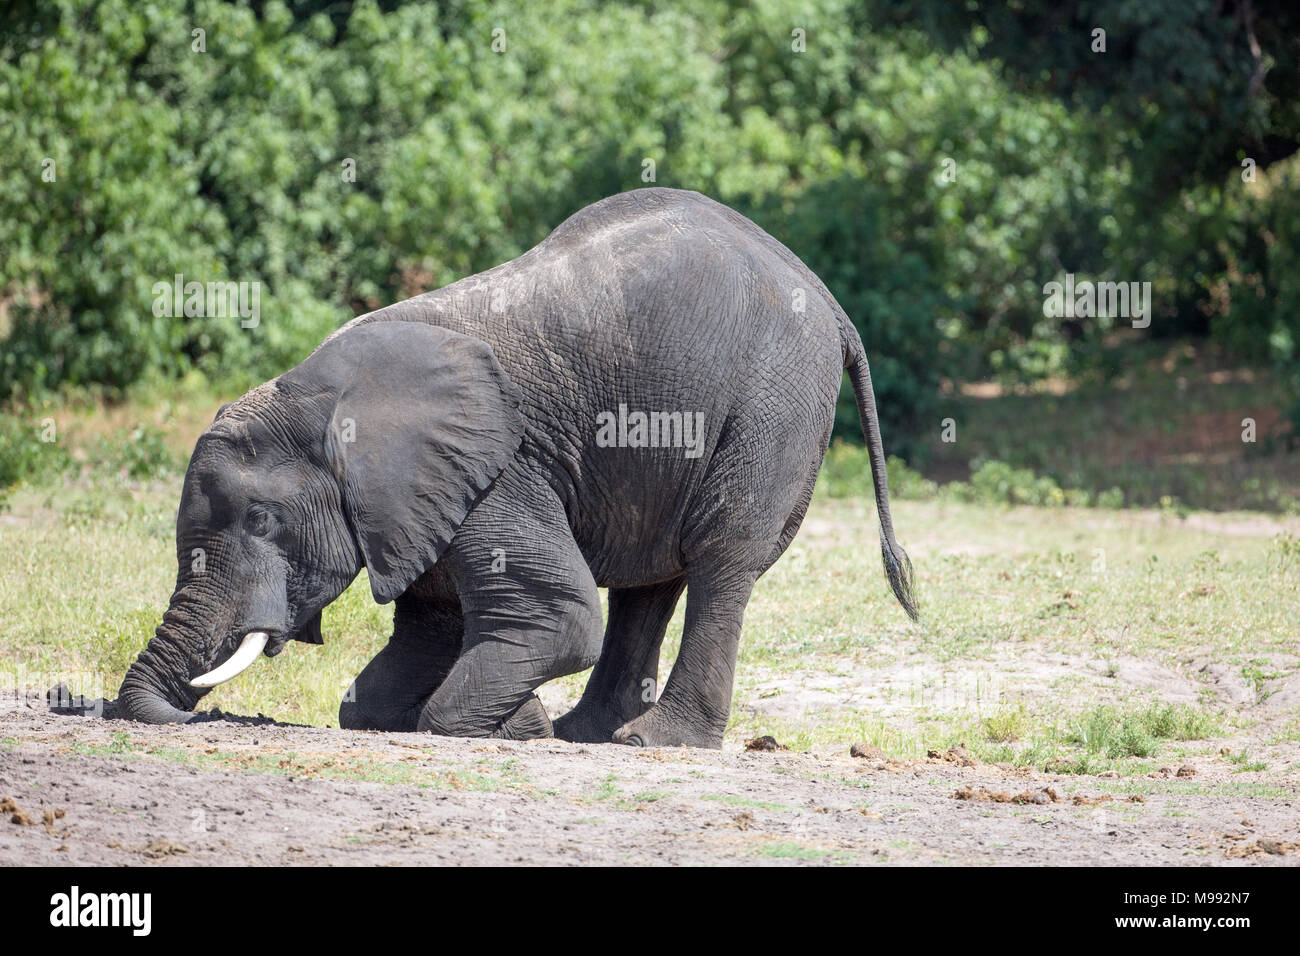 African Elephant (Loxodonta africana). Using tusks and trunk to dig a hole, bending down on foreleg knees, and find mineral salts, dietary supplements. Stock Photo